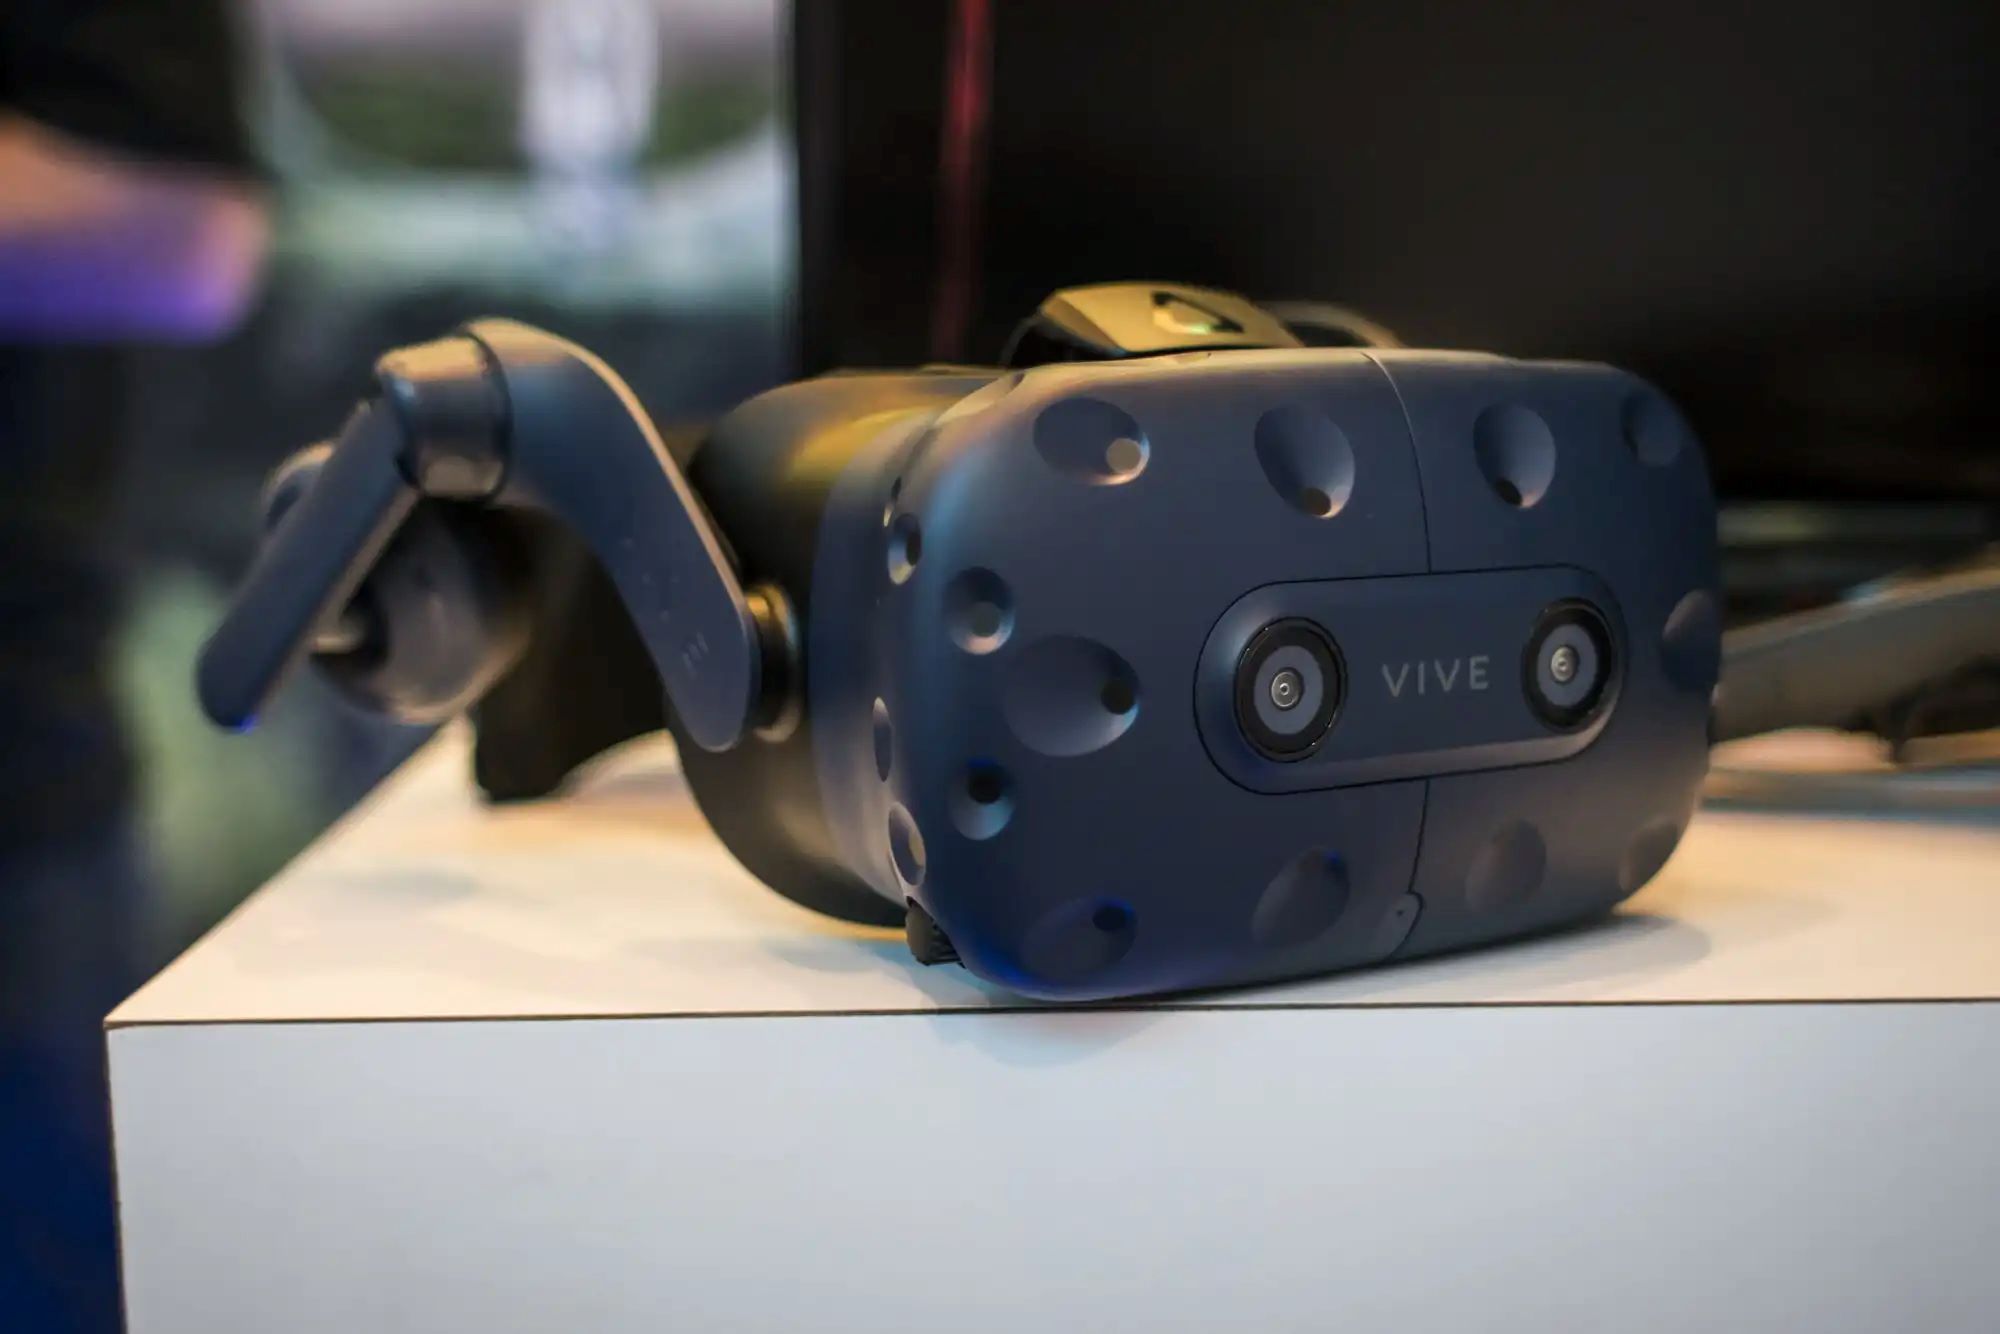 What Causes Black Screens For The HTC Vive Pro